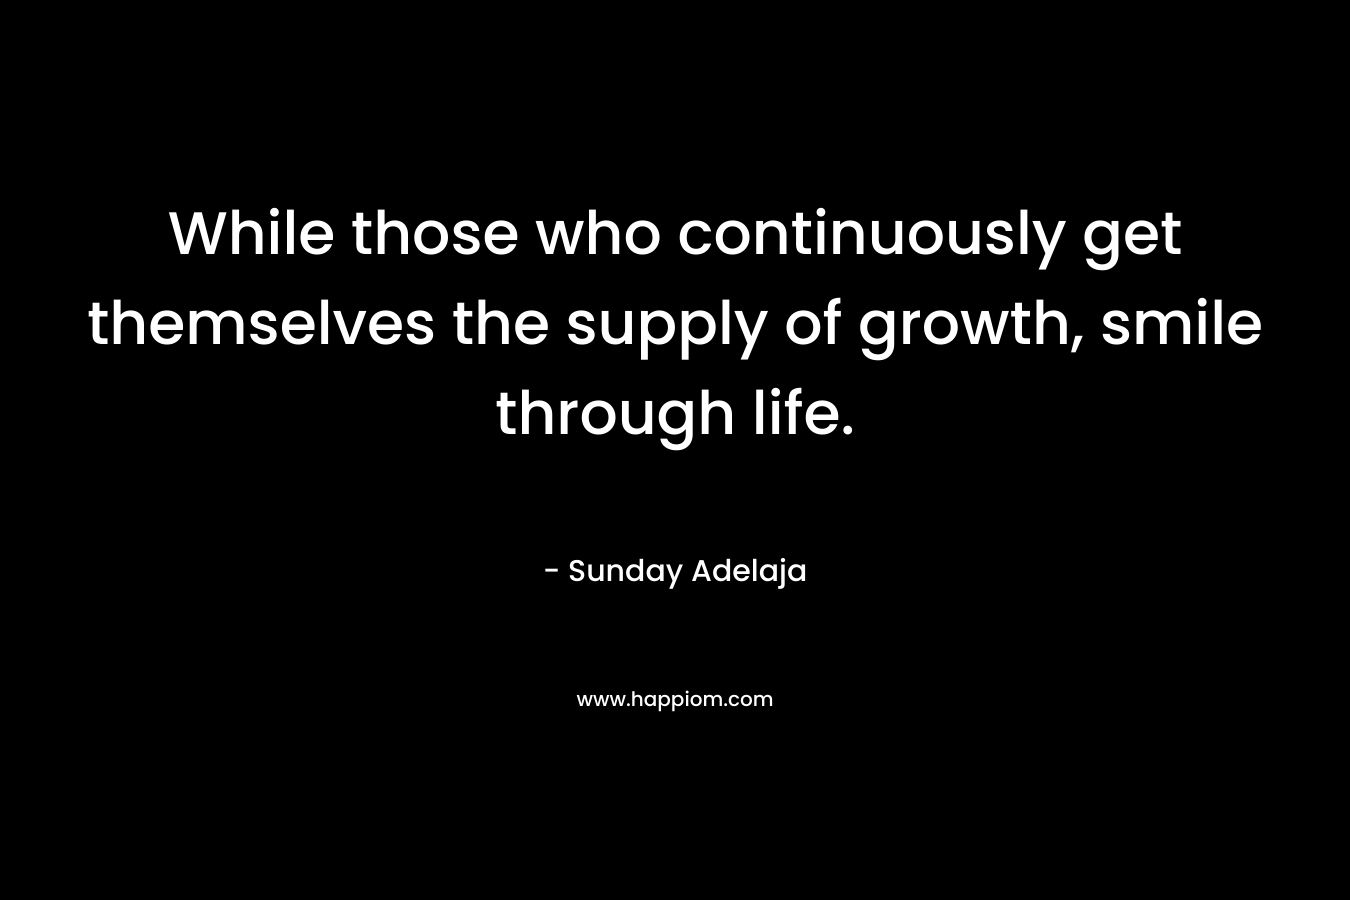 While those who continuously get themselves the supply of growth, smile through life.